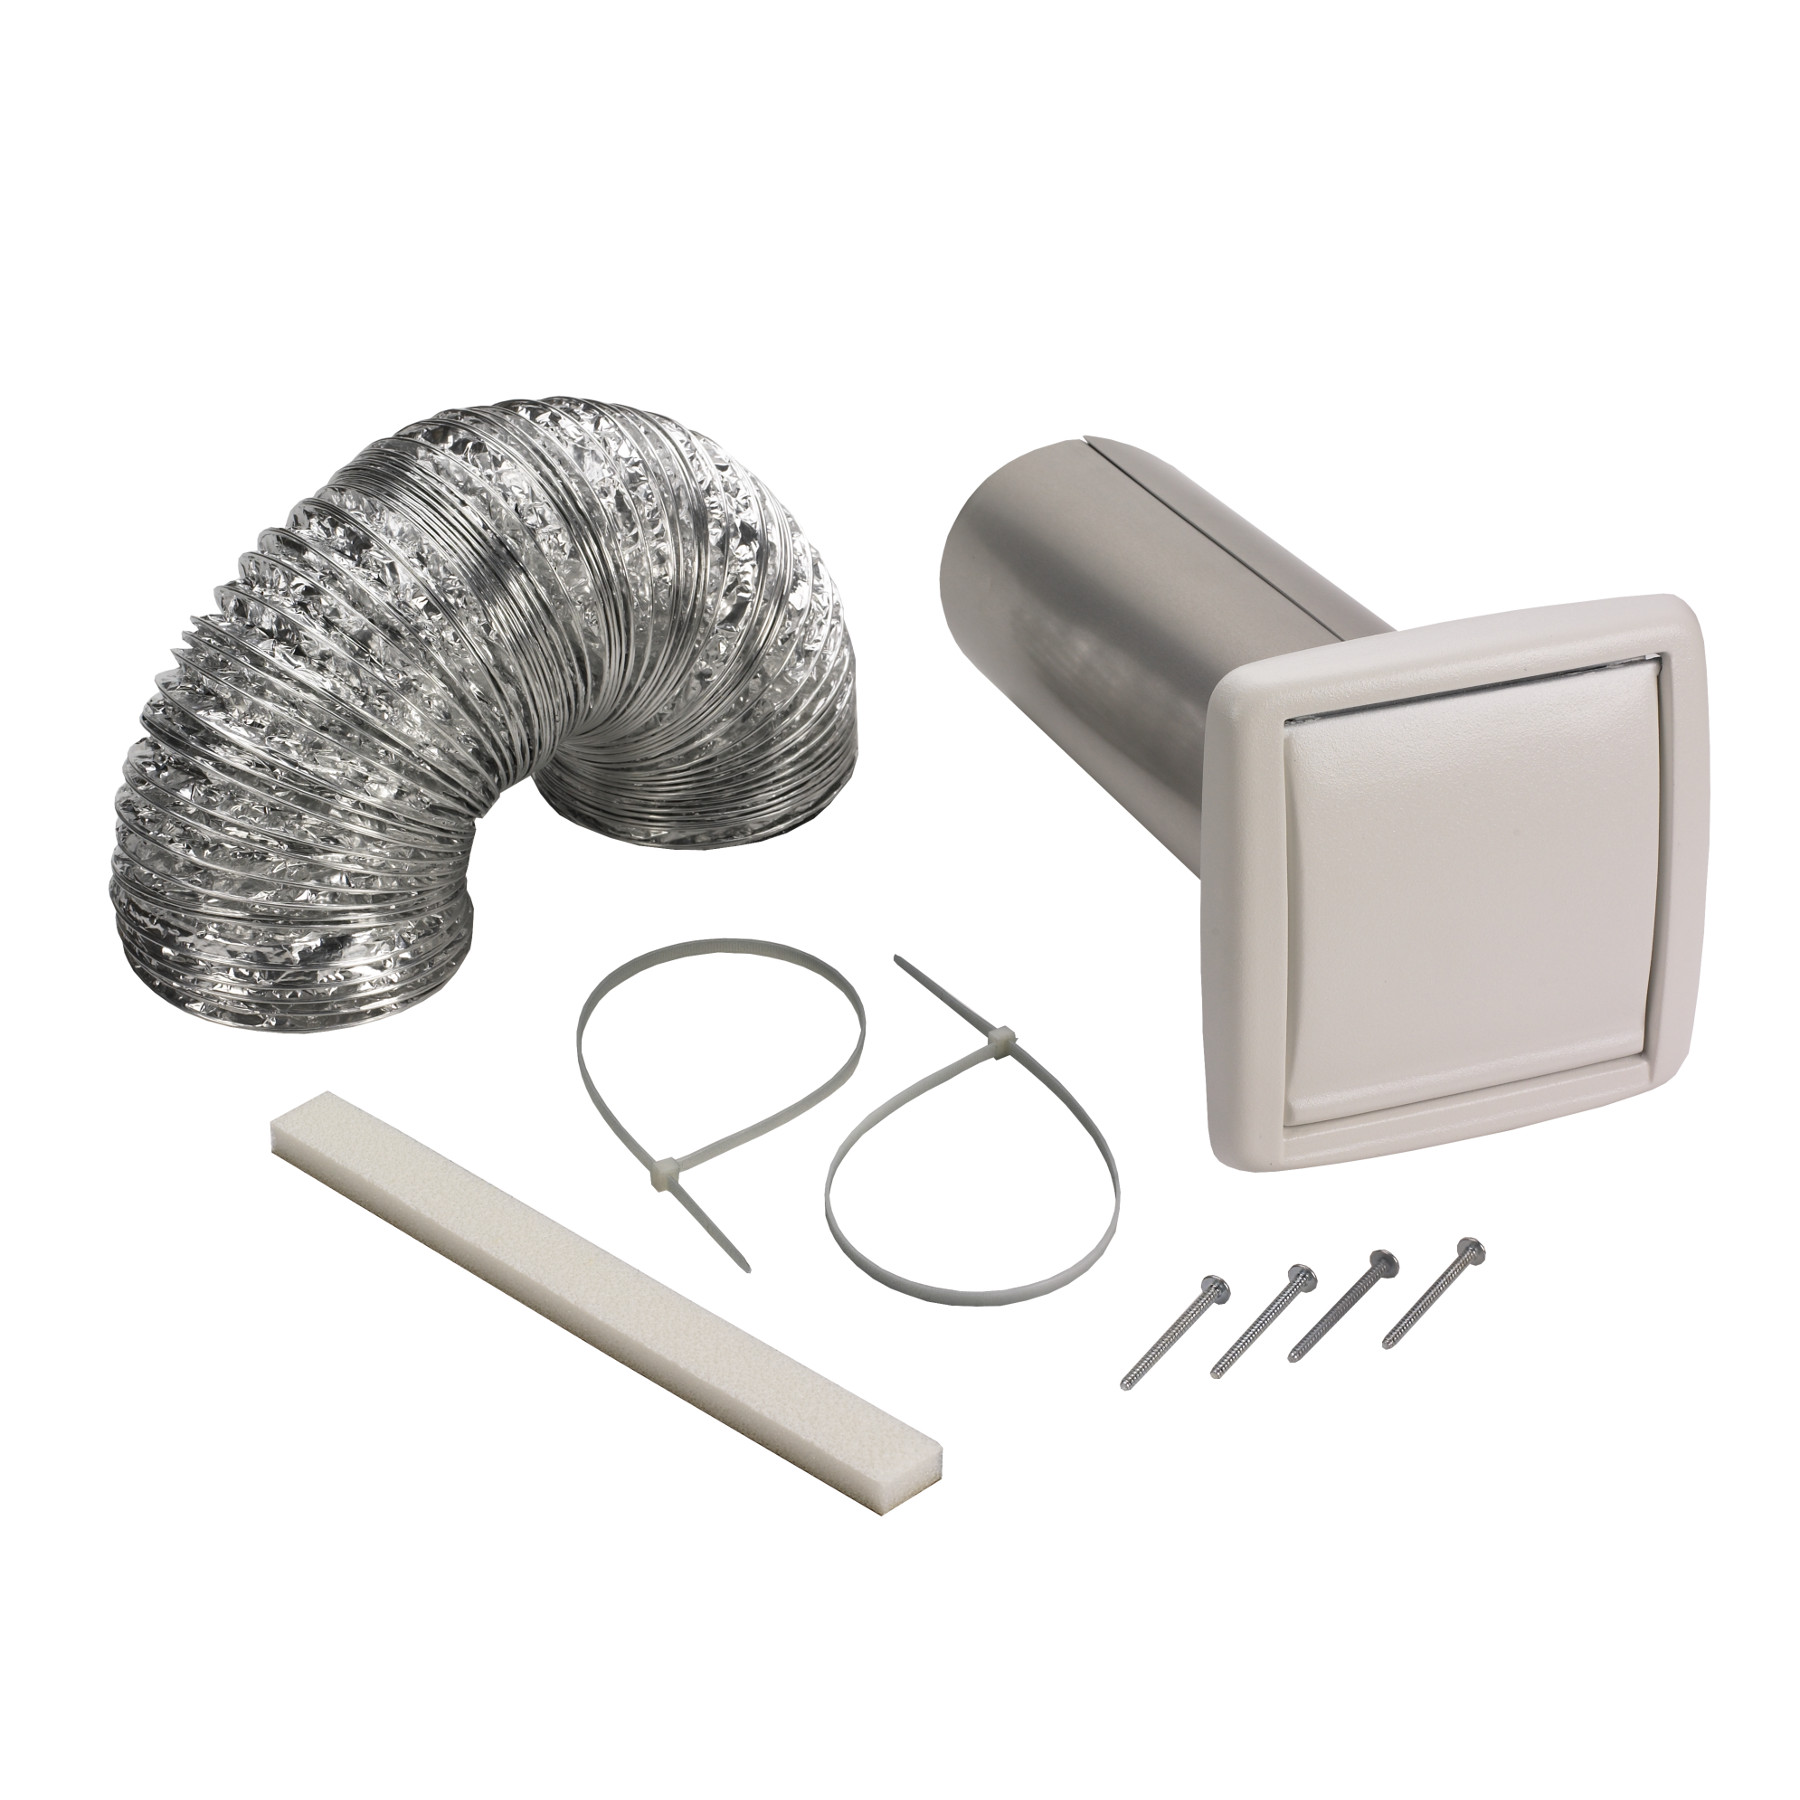 Broan-NuTone® Wall Vent Kit,  3" or 4" Round Duct